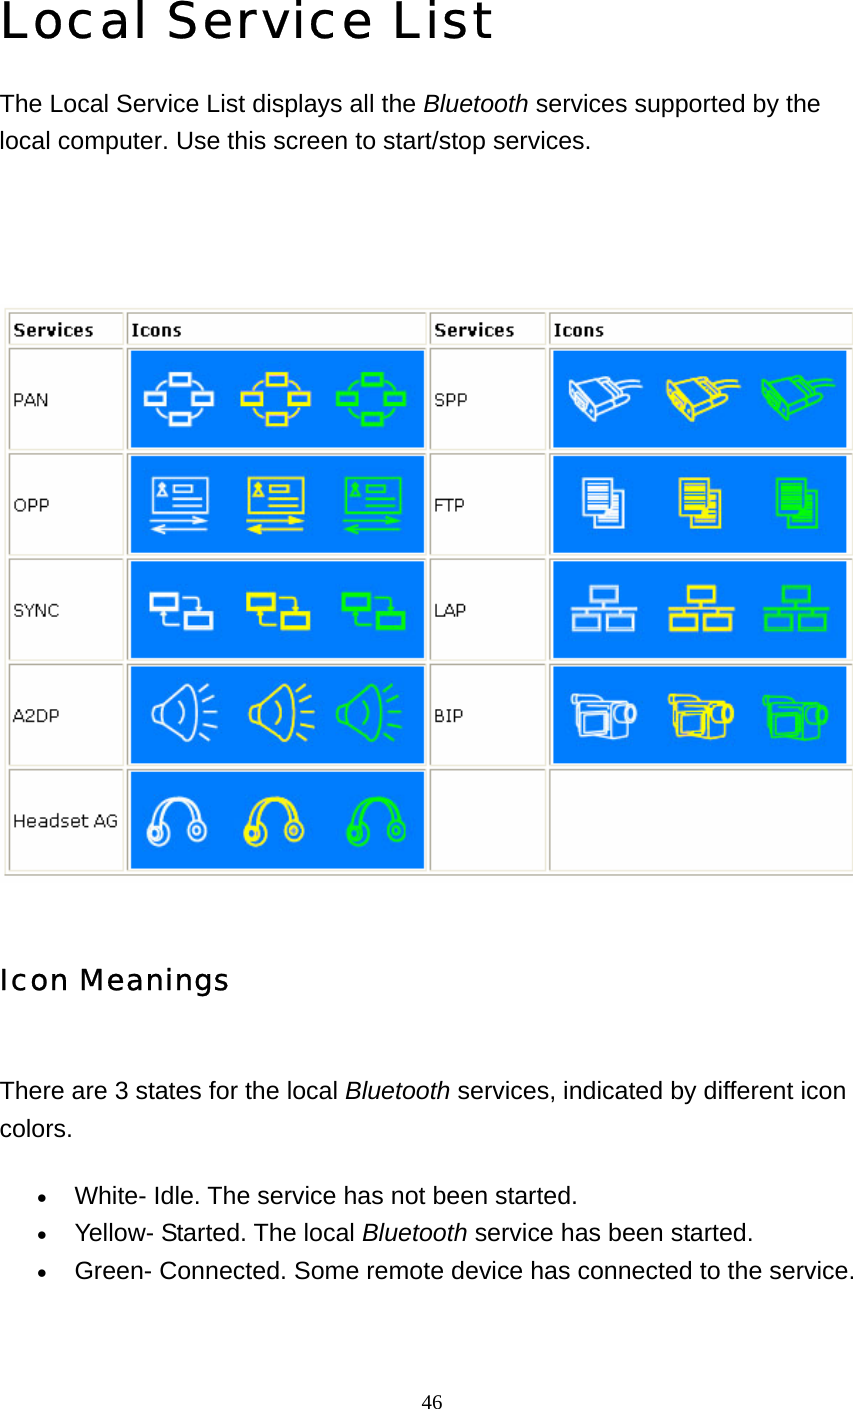   46  Local Service List The Local Service List displays all the Bluetooth services supported by the local computer. Use this screen to start/stop services.     Icon Meanings  There are 3 states for the local Bluetooth services, indicated by different icon colors.  • White- Idle. The service has not been started.   • Yellow- Started. The local Bluetooth service has been started.   • Green- Connected. Some remote device has connected to the service.   